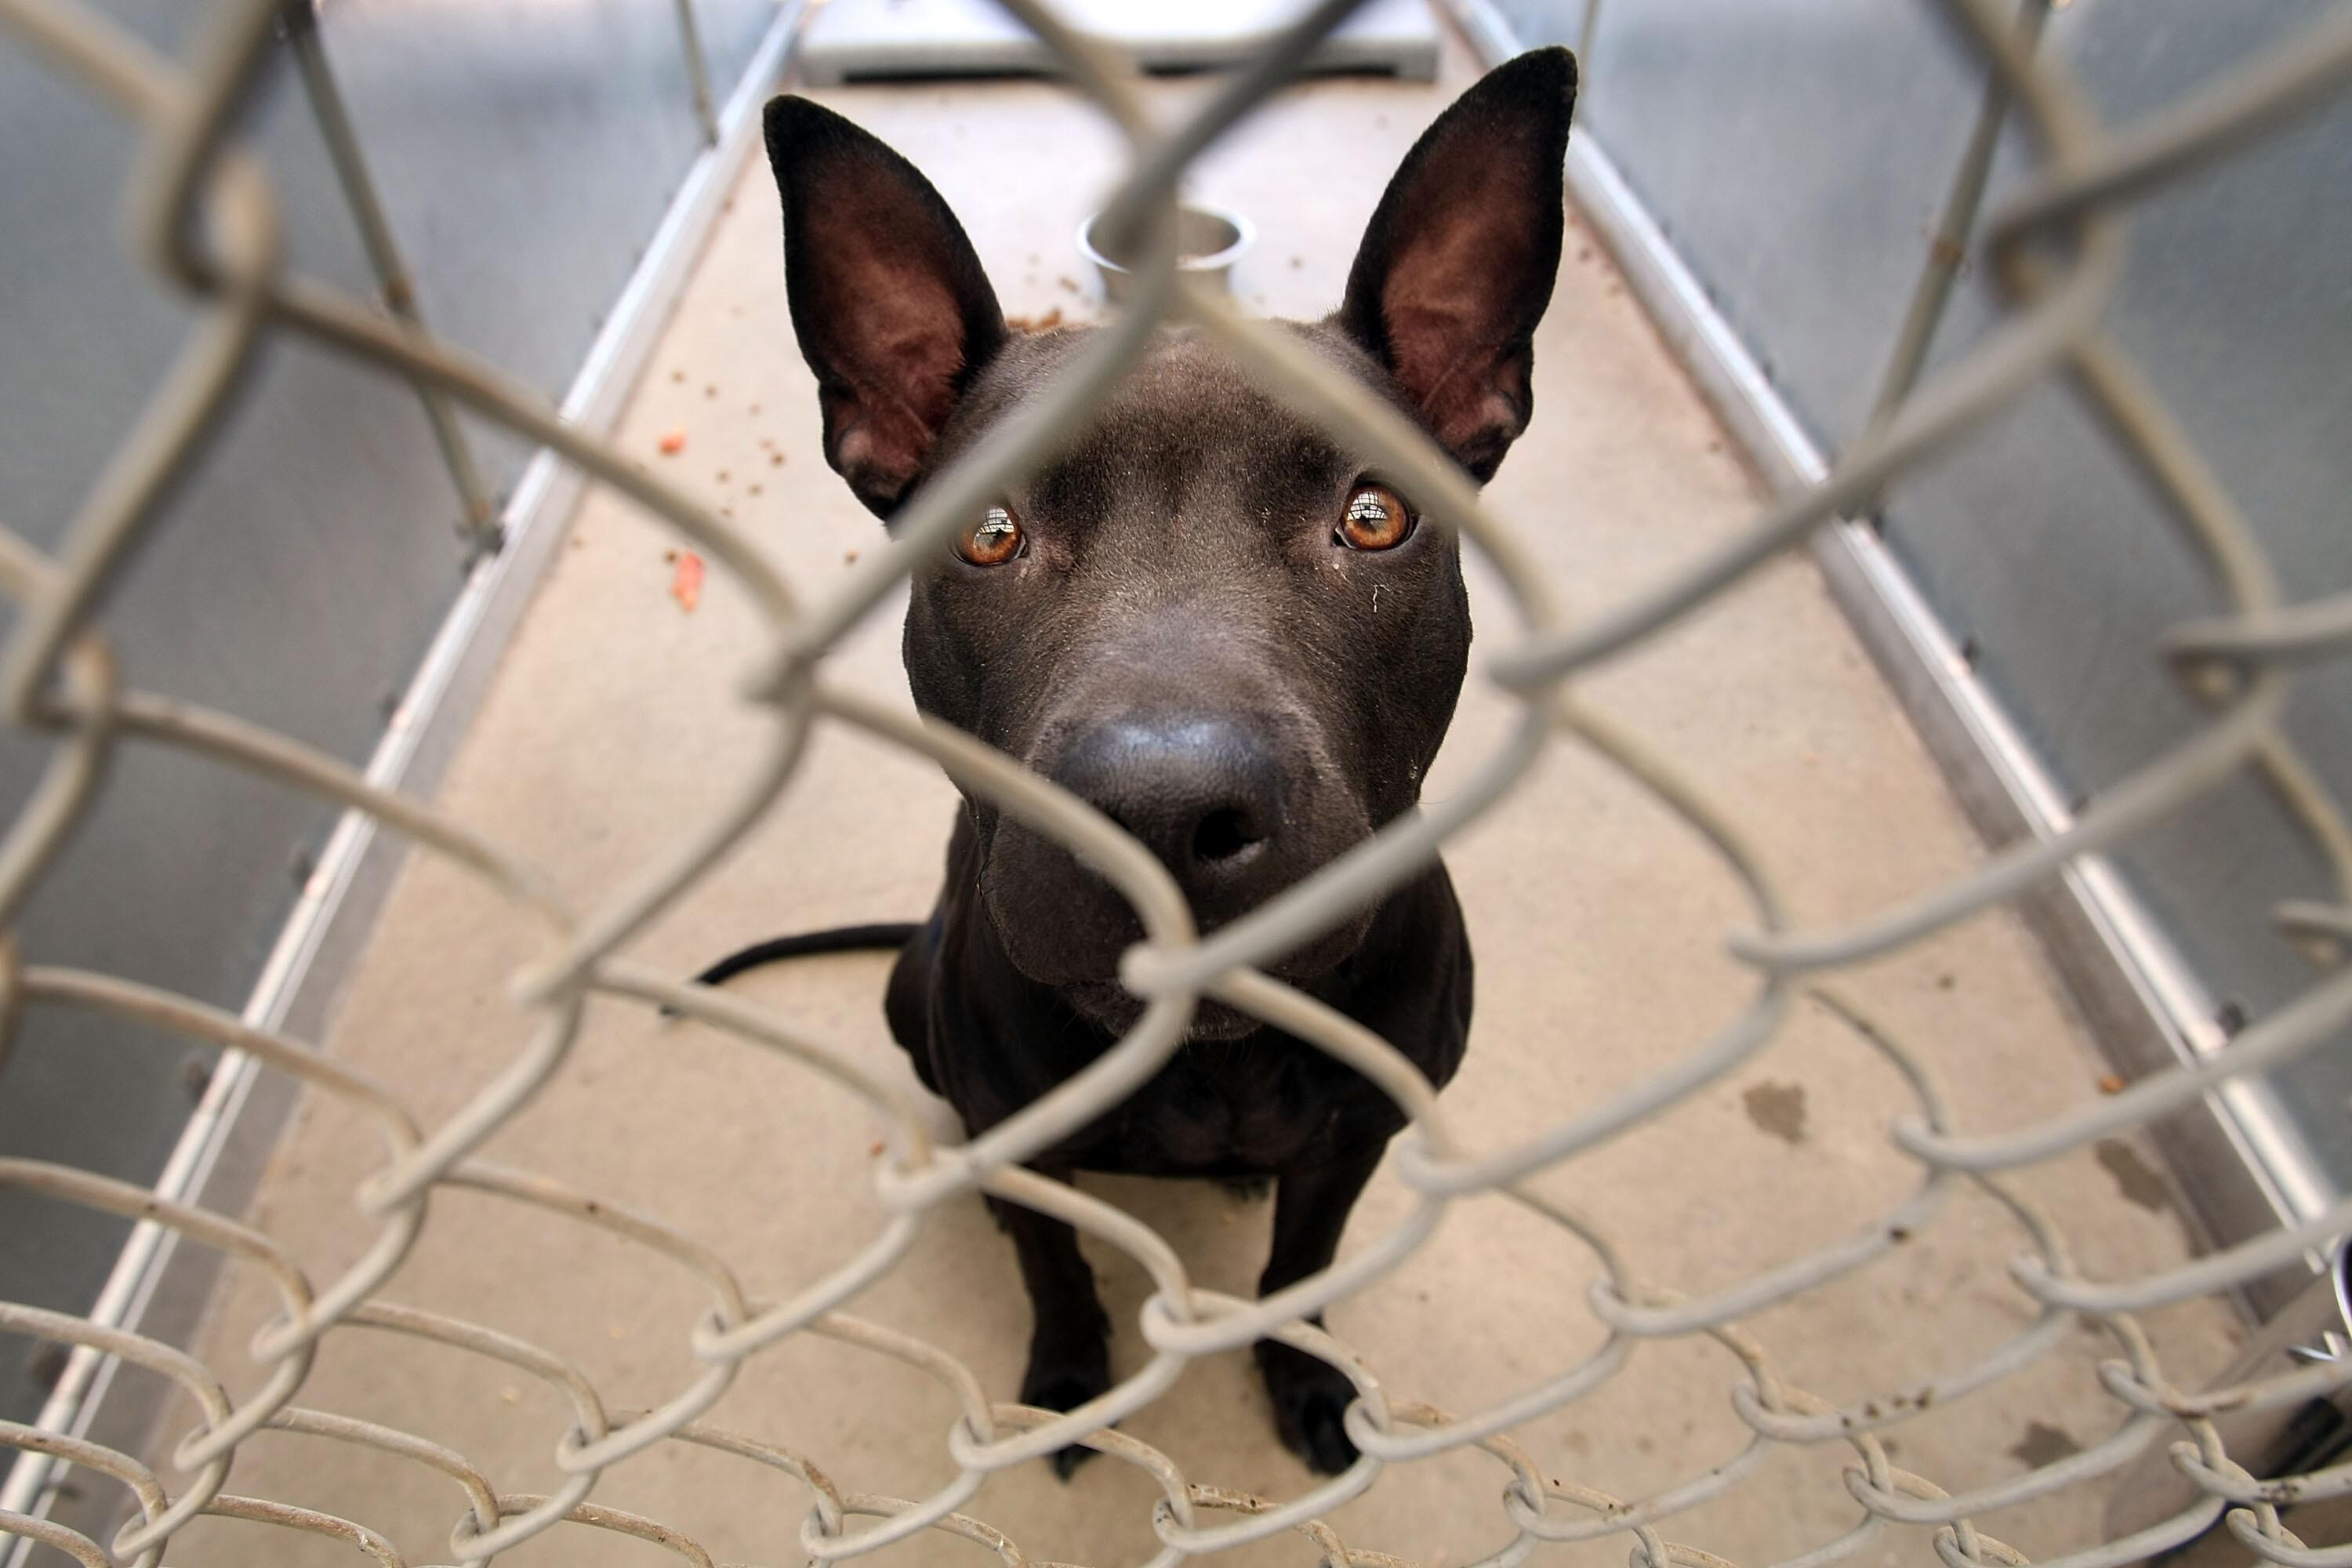 JERSEY CITY, NJ - JULY 24:  A pit bull looks out from a cage in the Liberty Humane Society shelter July 24, 2007 in Jersey City, New Jersey. According to animal shelter statistics, around one-third of all dogs coming into shelters nationwide are pit bulls